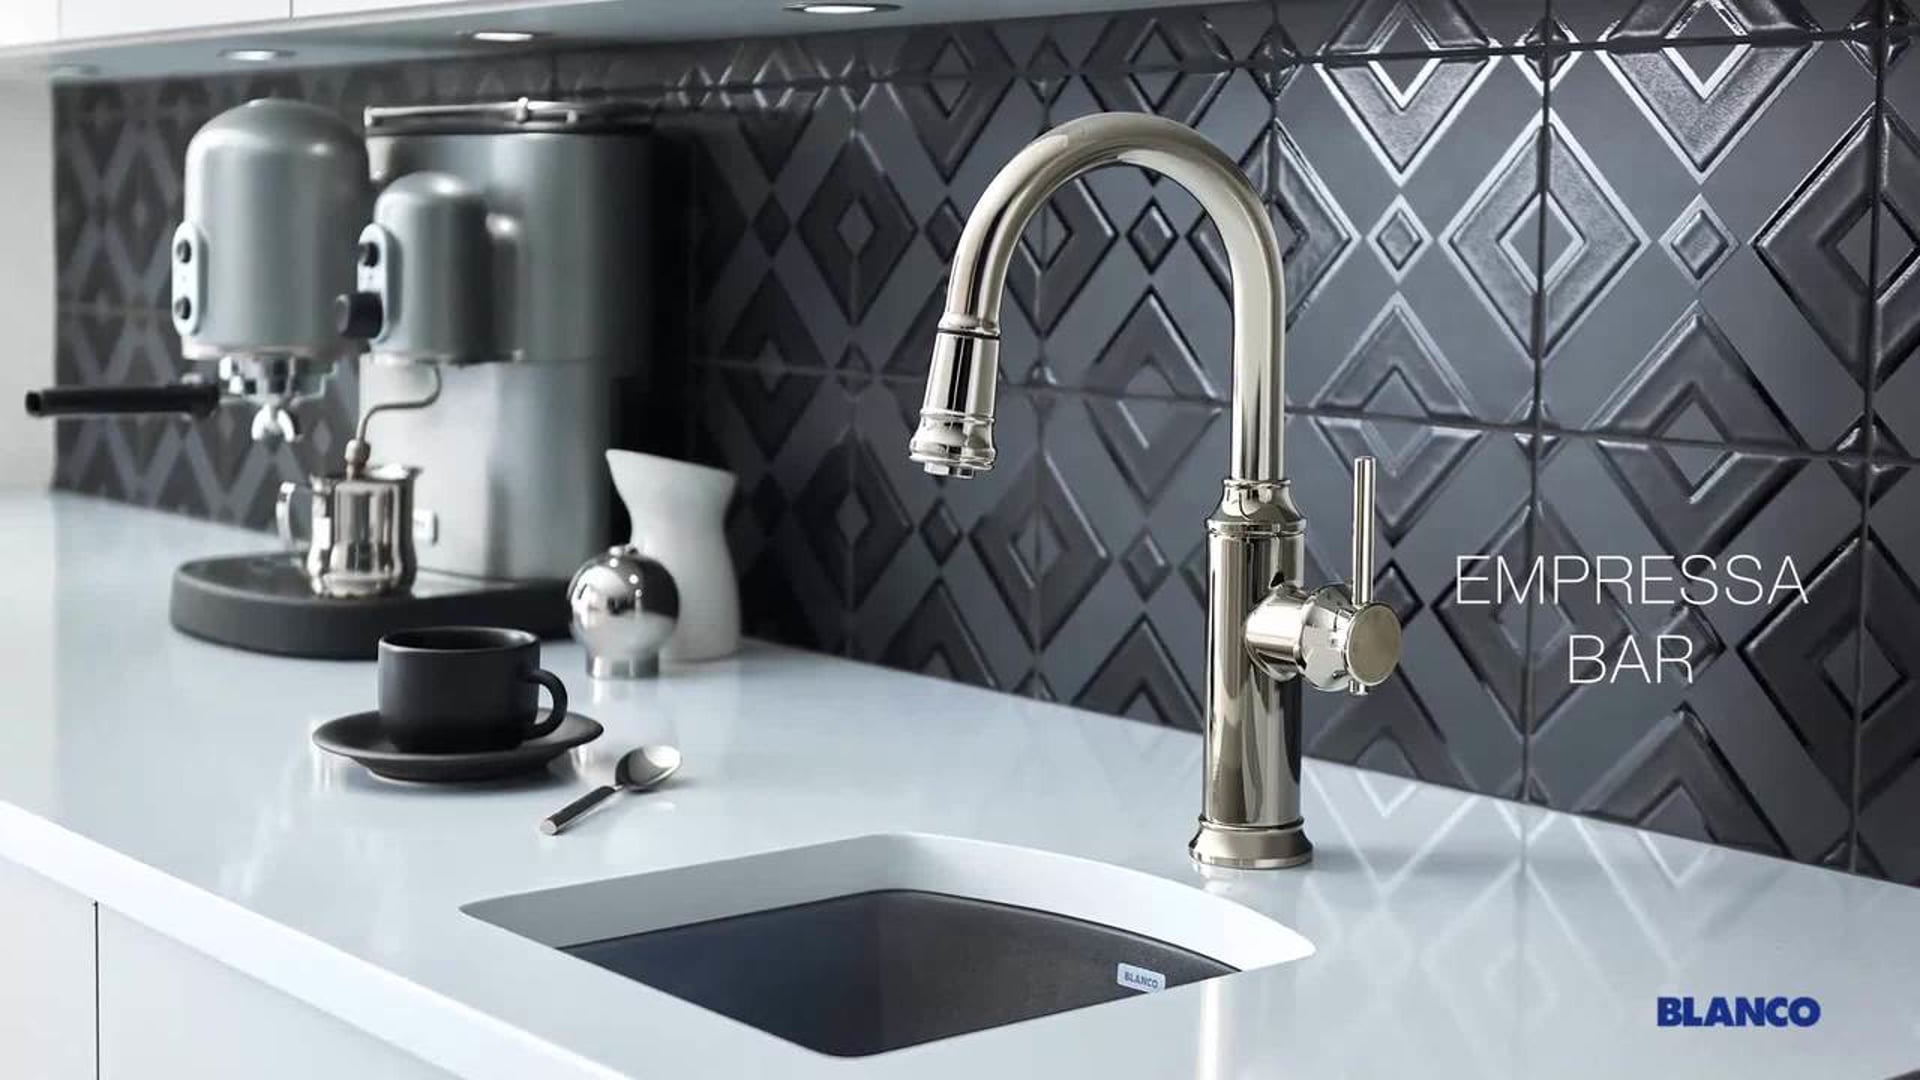 Blanco Empressa 1-Handle Pull-Down Bar Faucets, Stainless Steel